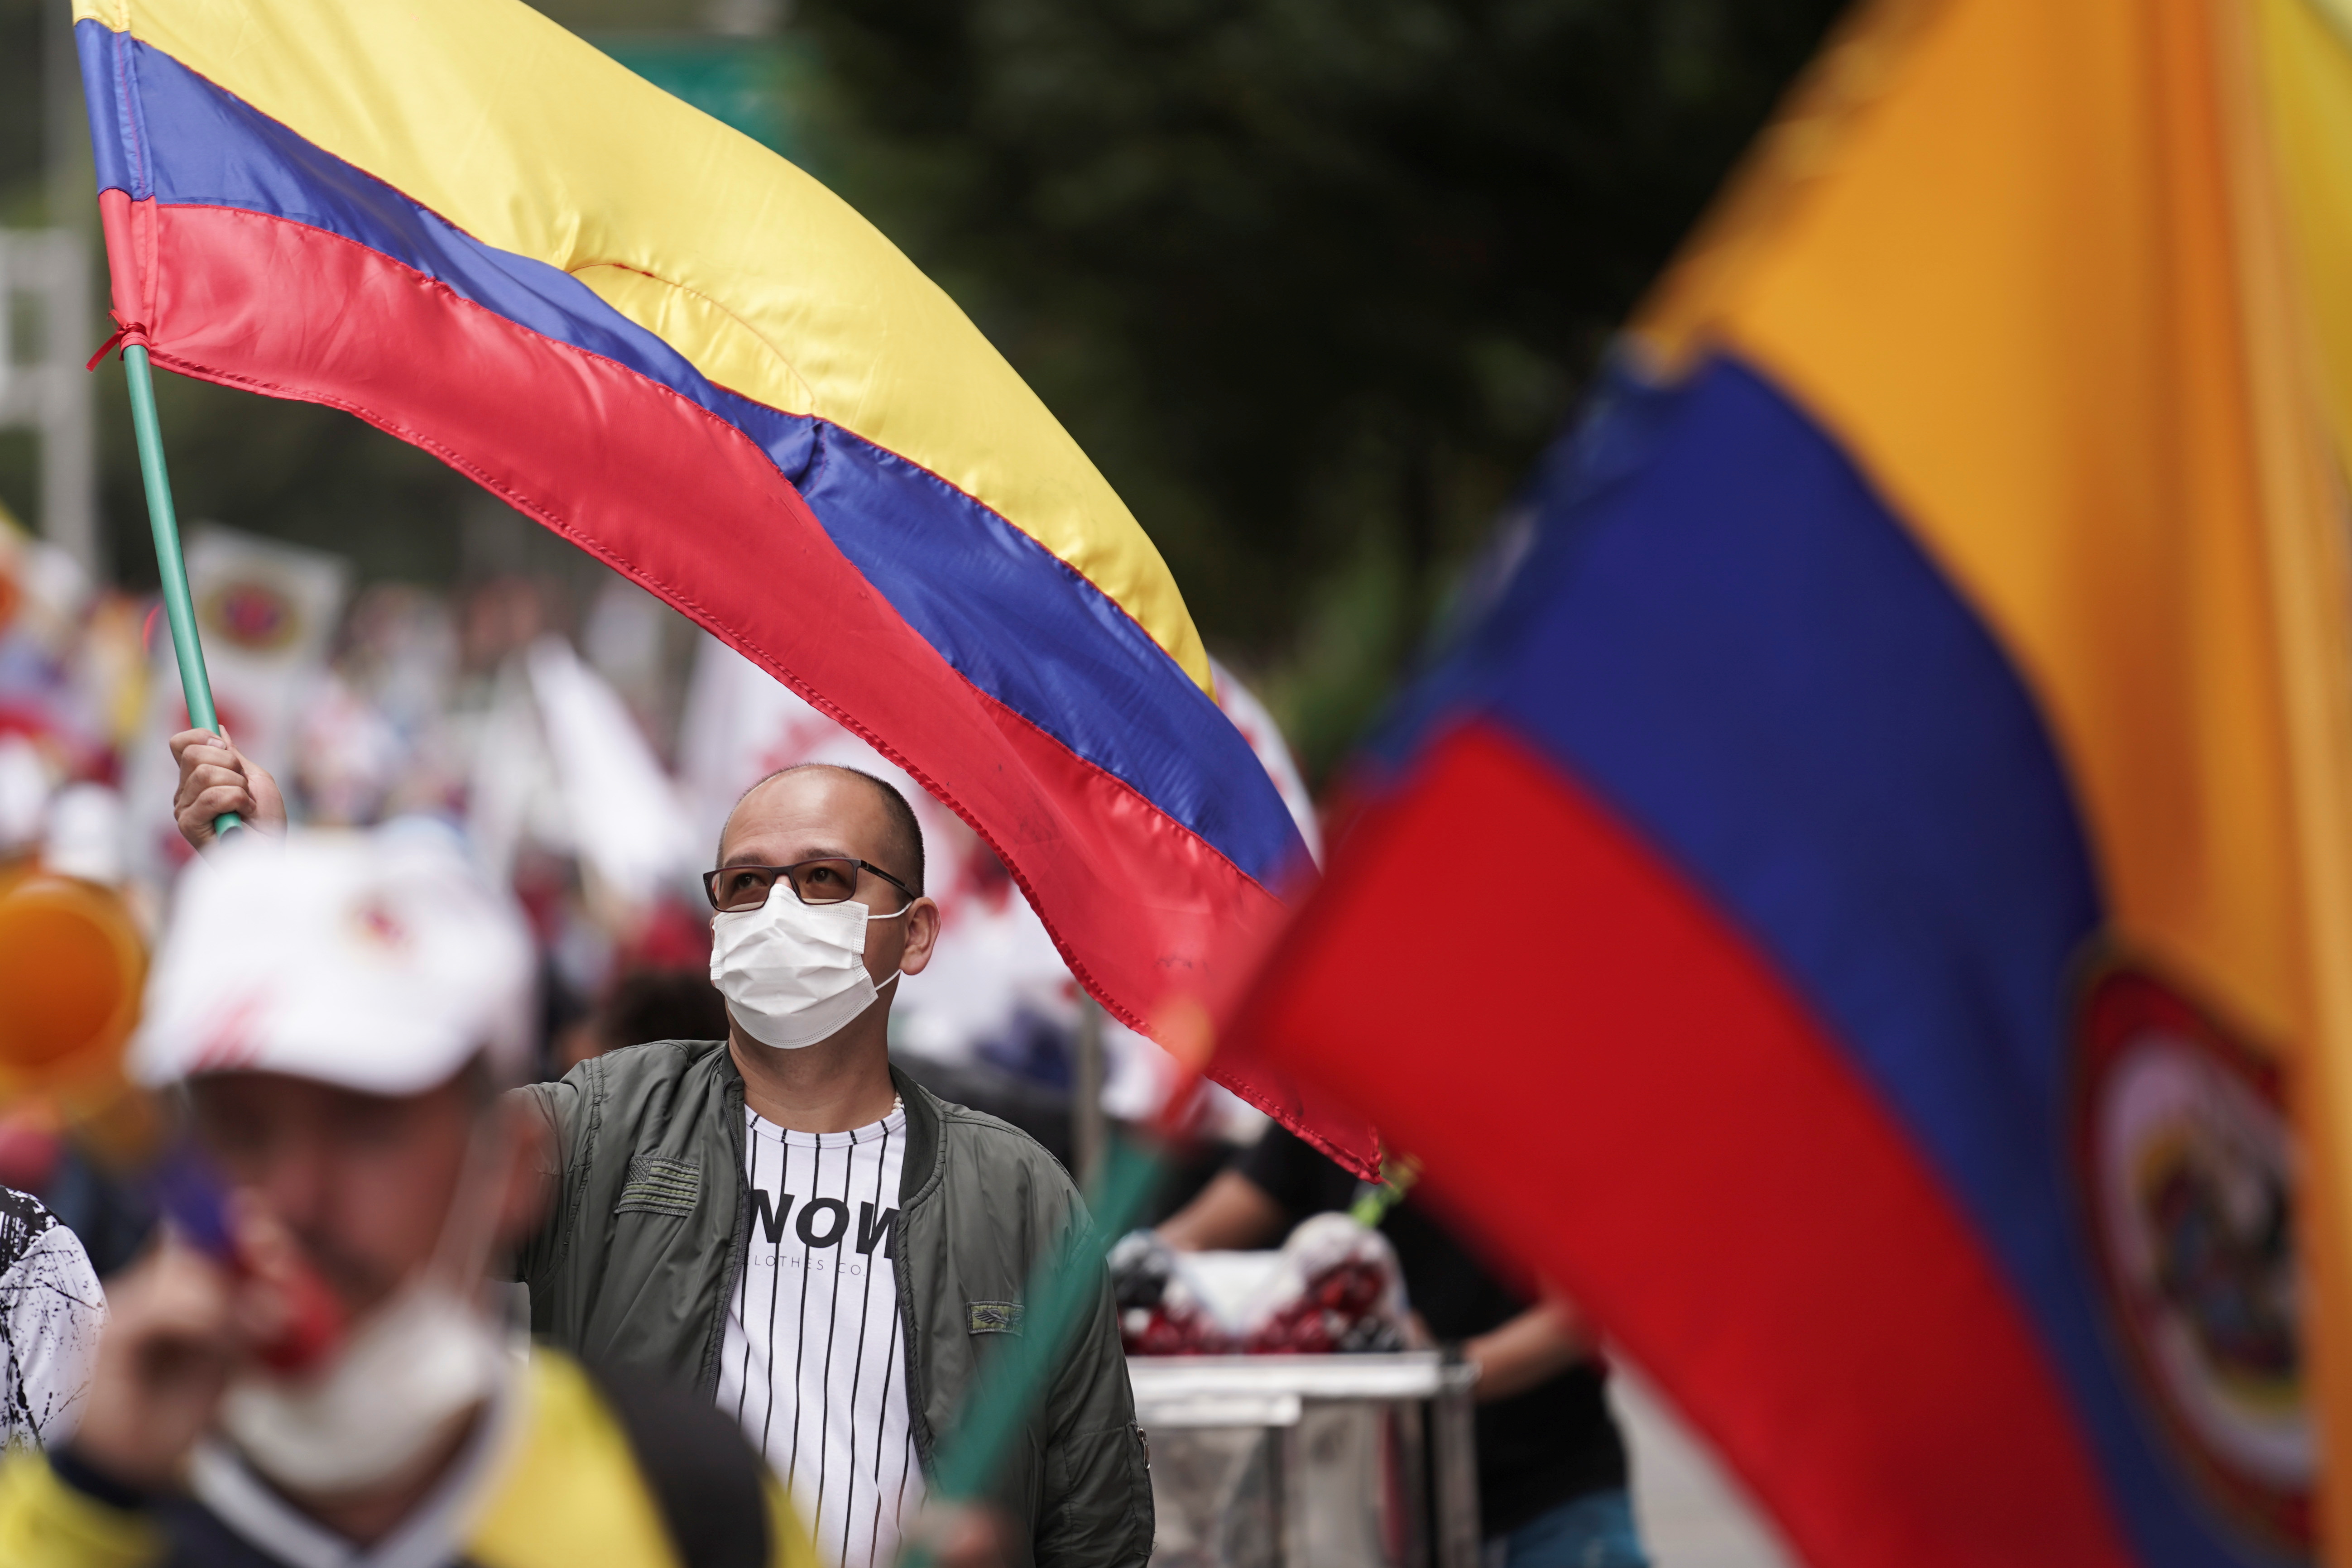 Demonstrators gather for an anti-government march demanding changes to the social and economic policies, during Colombia's Independence Day, in Bogota